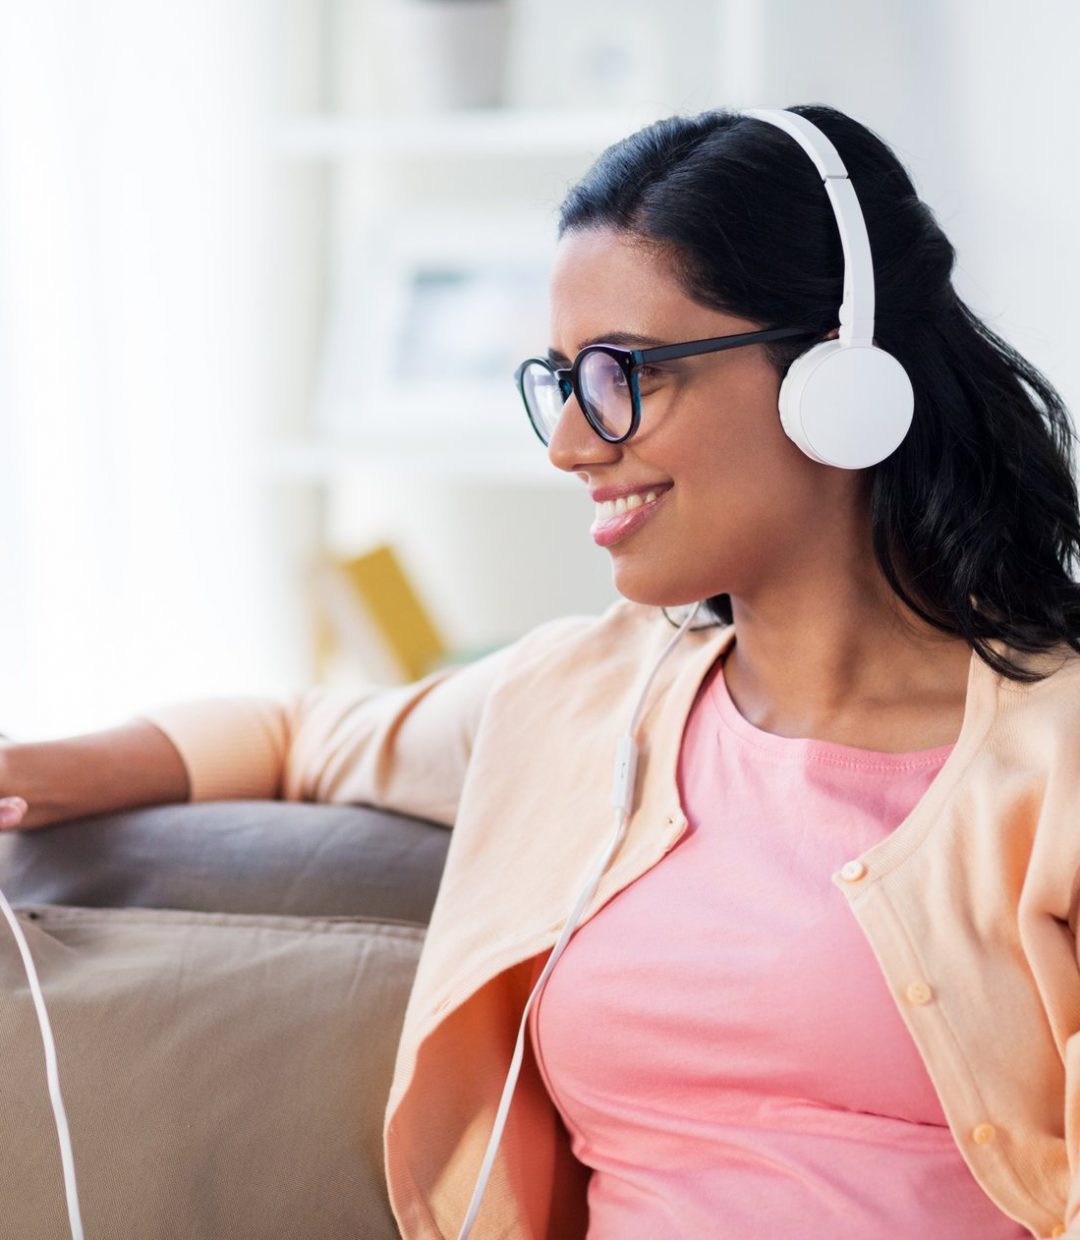 happy-woman-with-tablet-pc-and-headphones-at-home-P32QZJA-1.jpg